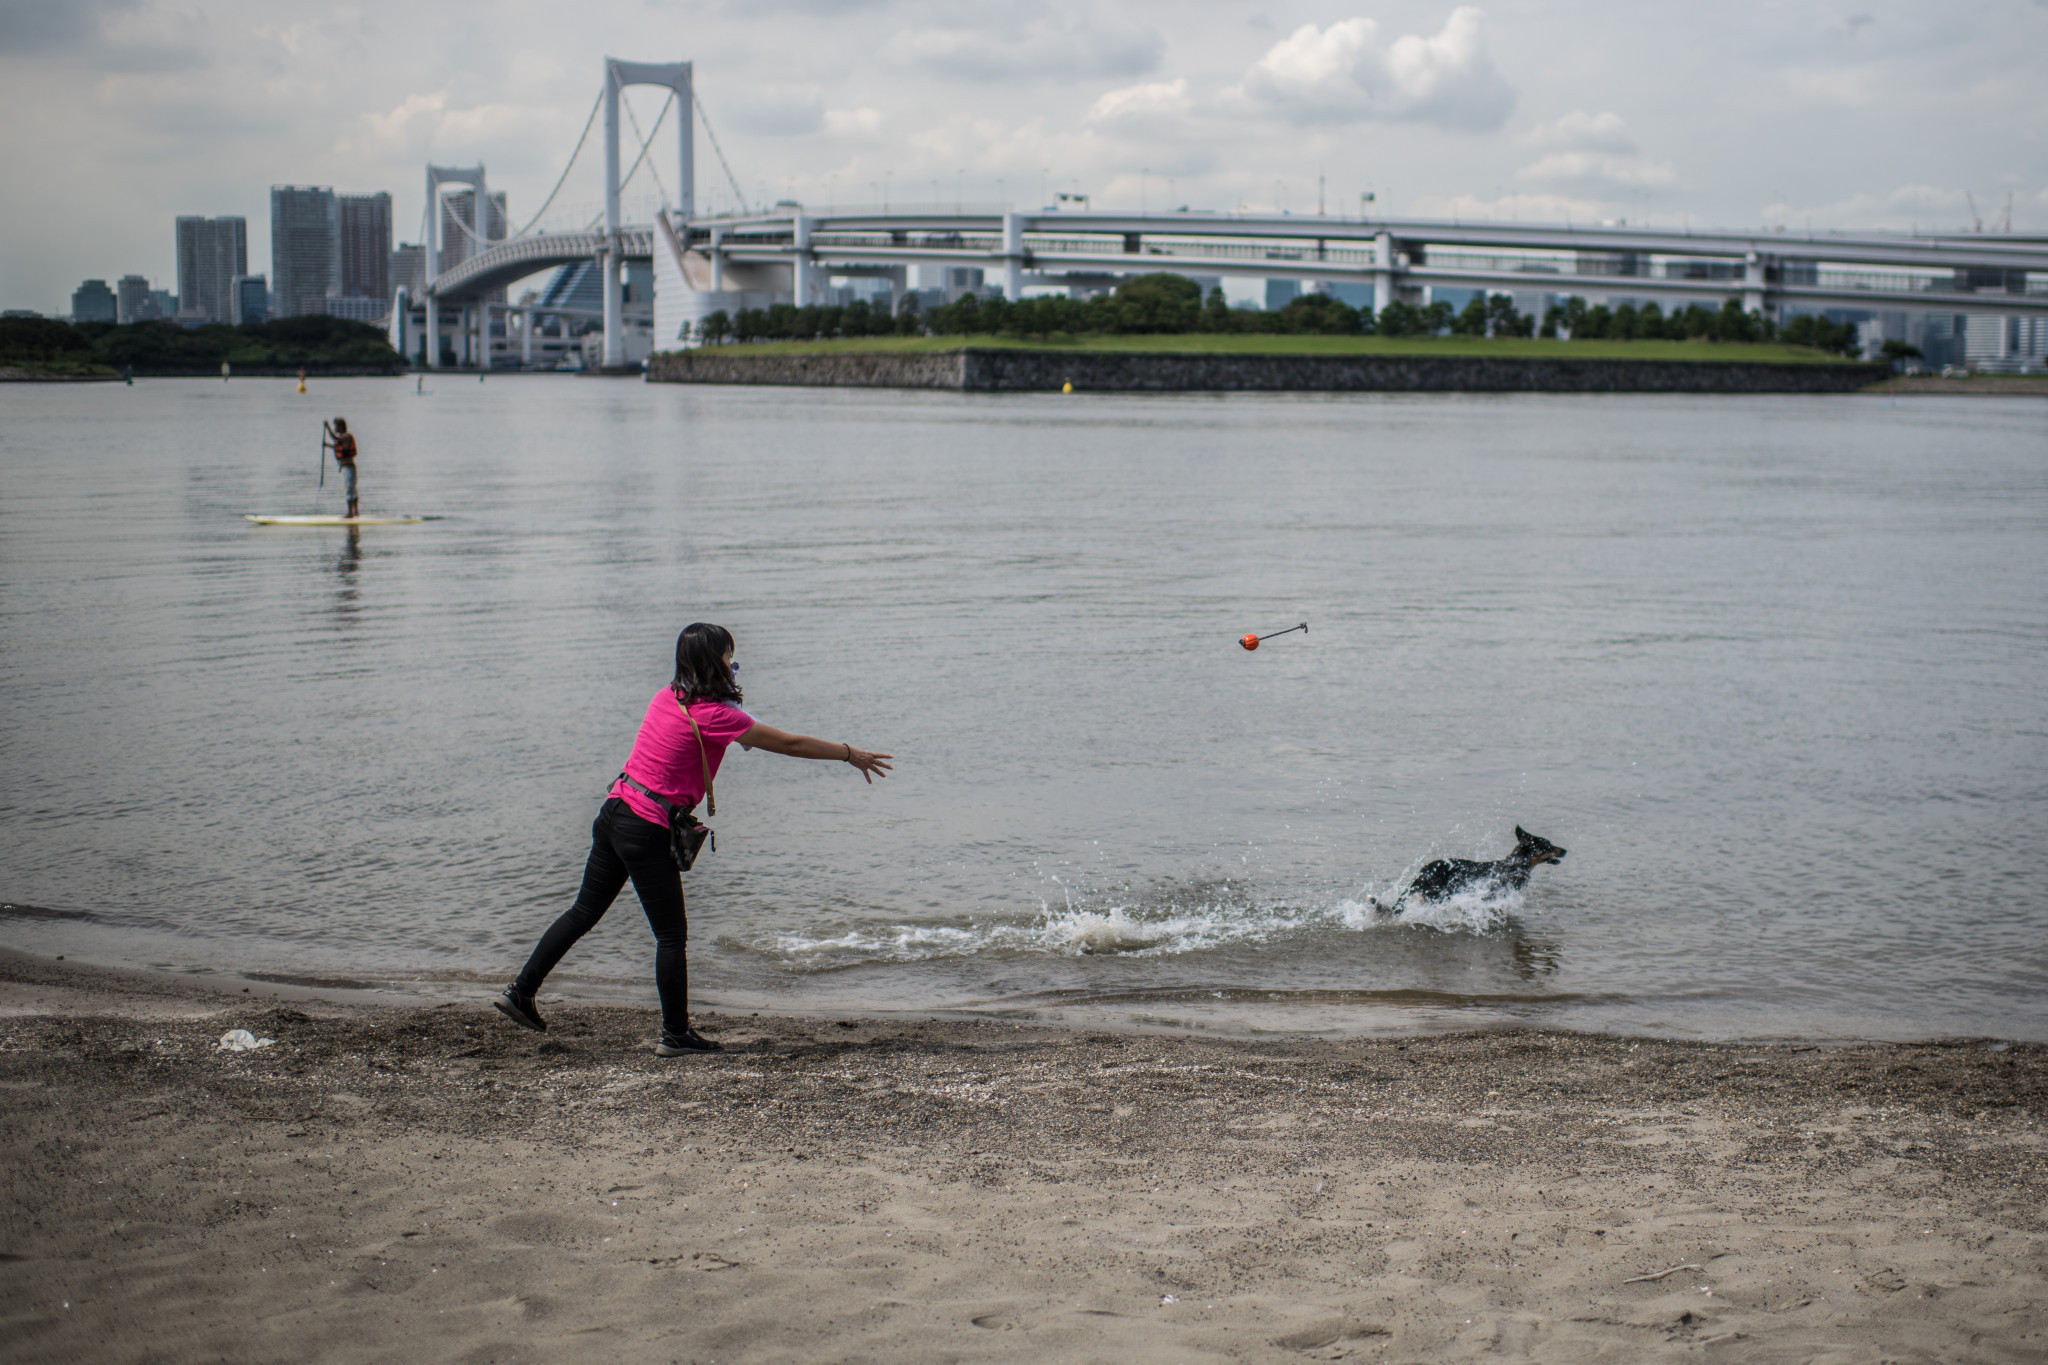 Tokyo 2020 will be keeping a close eye on the water quality during tomorrow's test event ©Getty Images